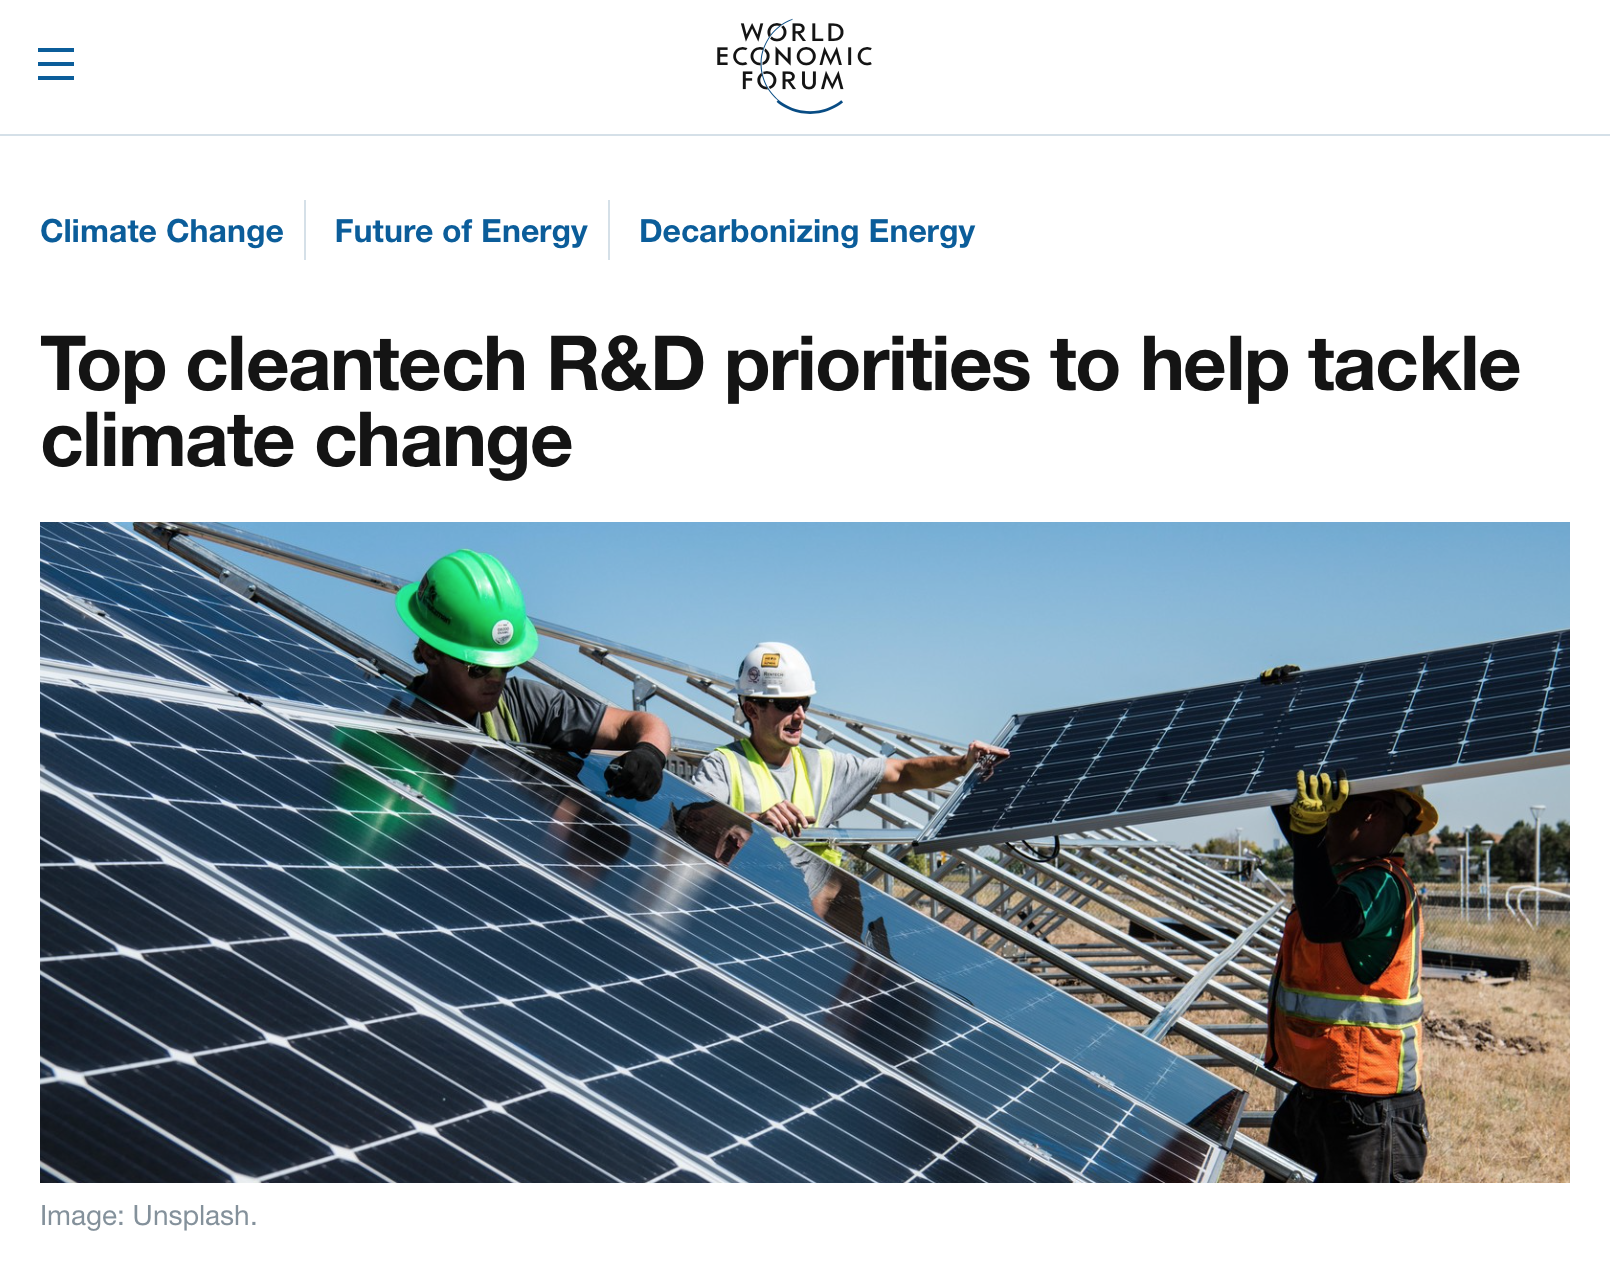 New FCA analysis on Cleantech R&D released through World Economic Forum